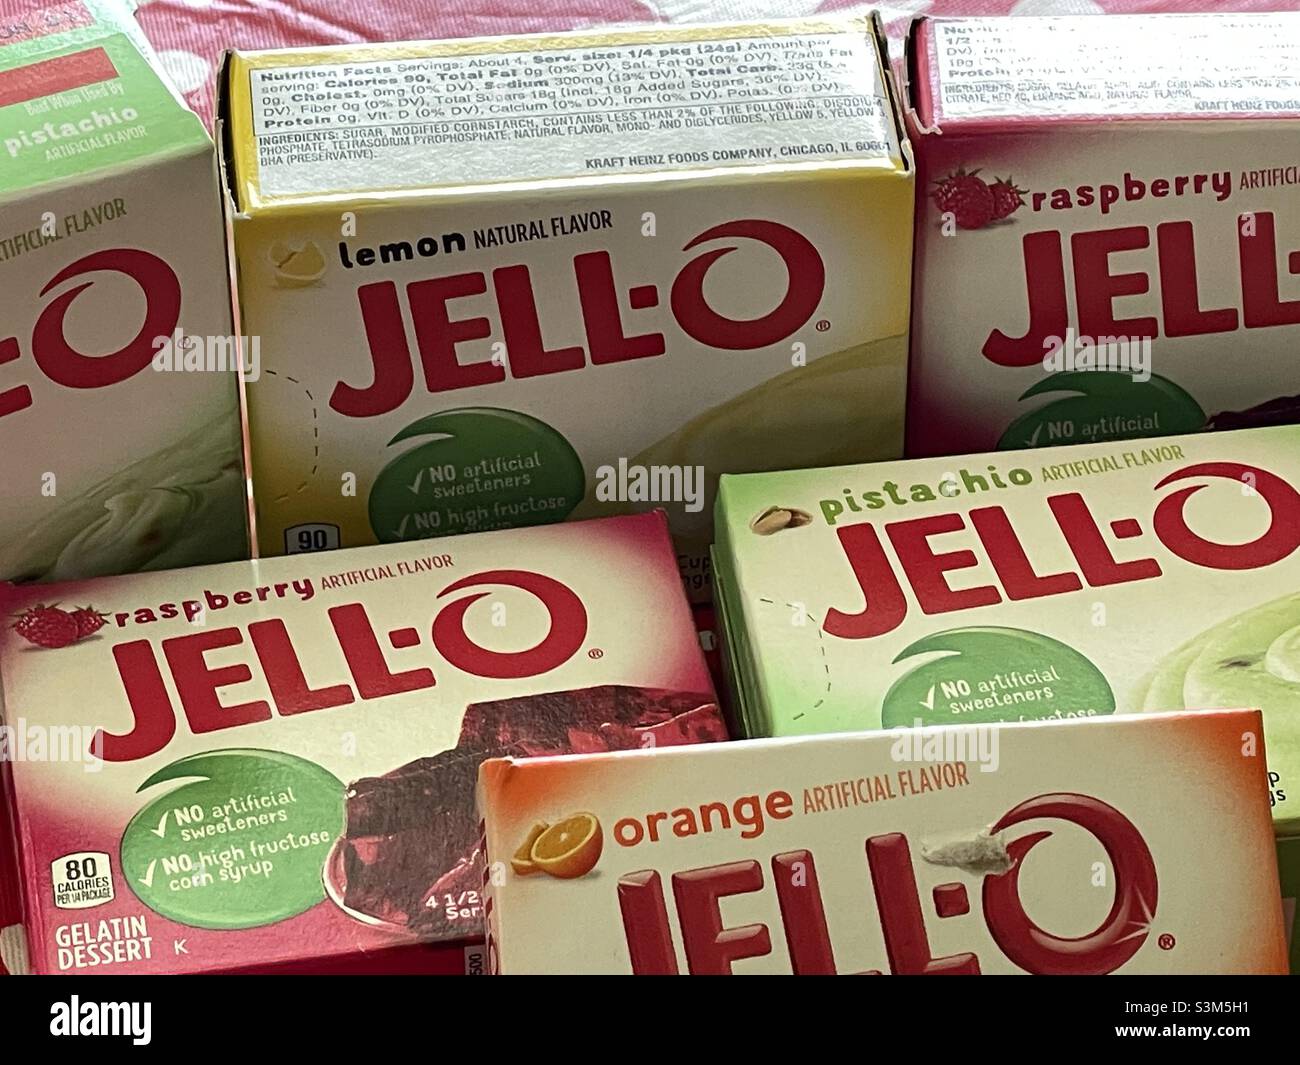 A still life of boxes of jell-o mixes of multiple flavors: raspberry, orange, lemon and pistachio. Stock Photo